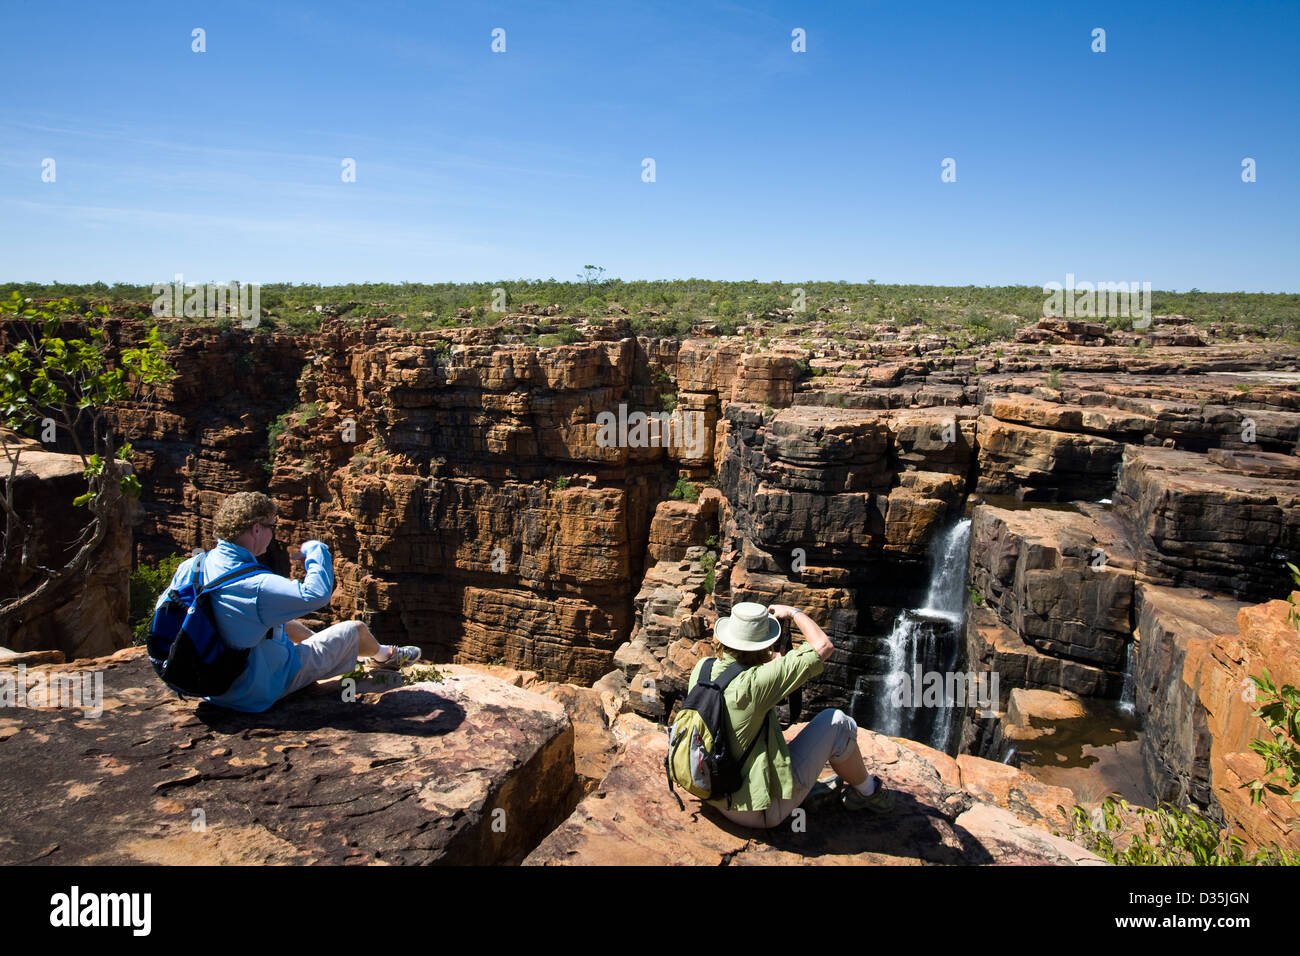 View from atop the sandstone Gardner Plateau at King George Falls, Kimberley region, Western Australia Stock Photo